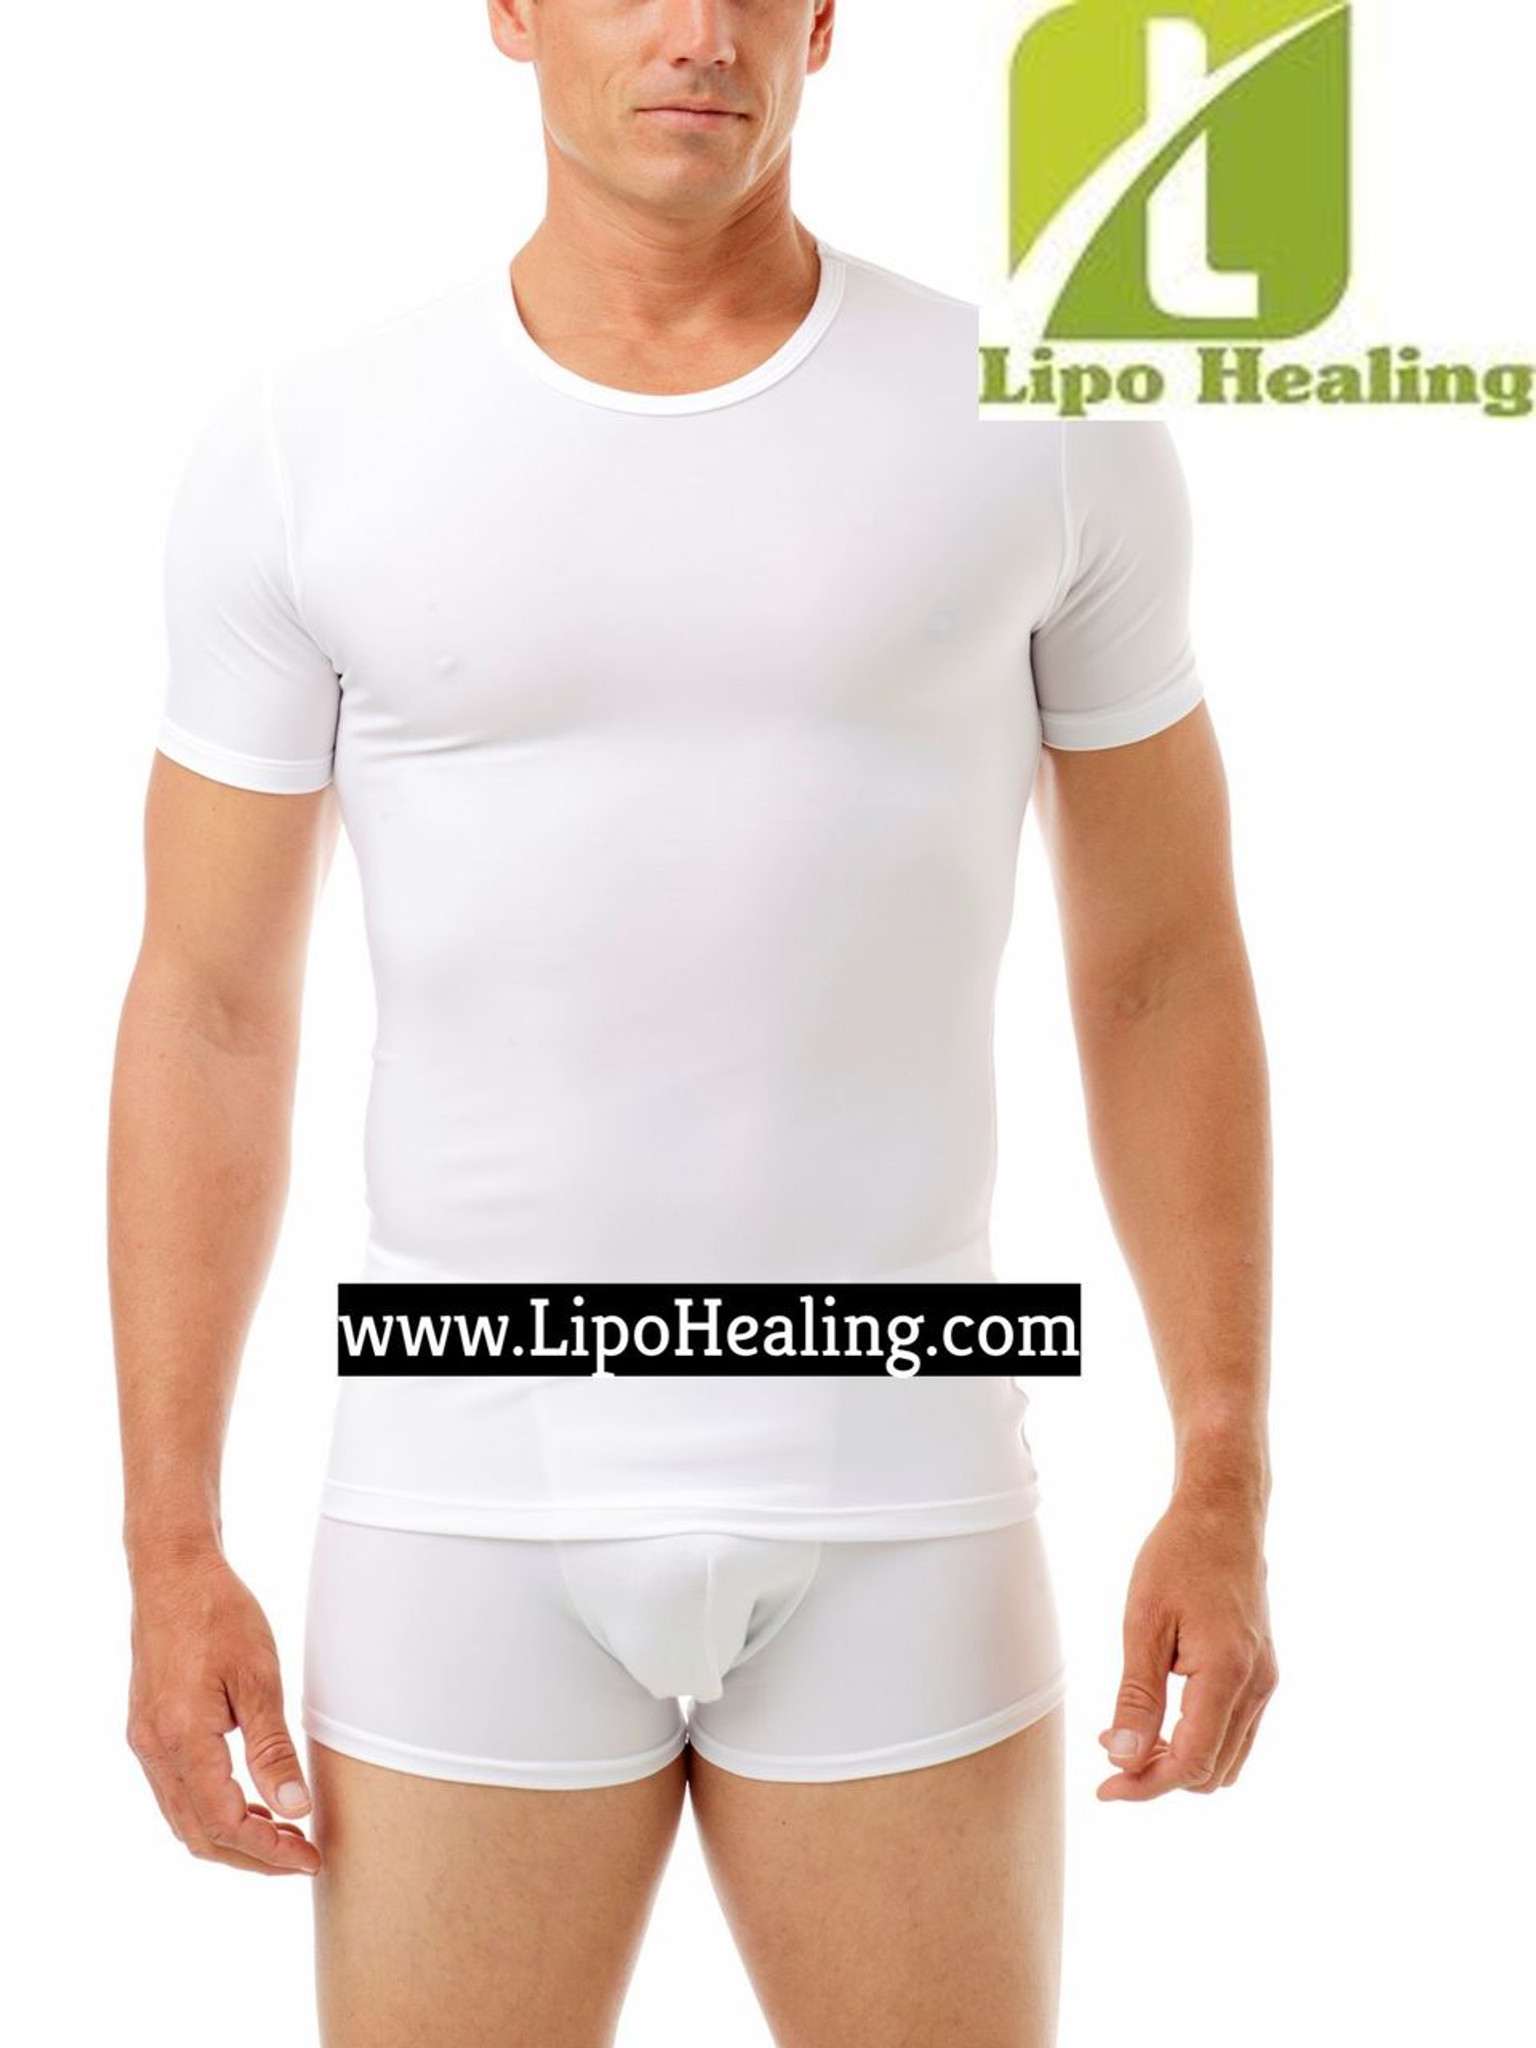 MALE HIGH COMPRESSION SHIRT CREW NECK PROUDLY MADE IN THE USA ONLINE -  Liposuction Healing Foam, Lipo Foam